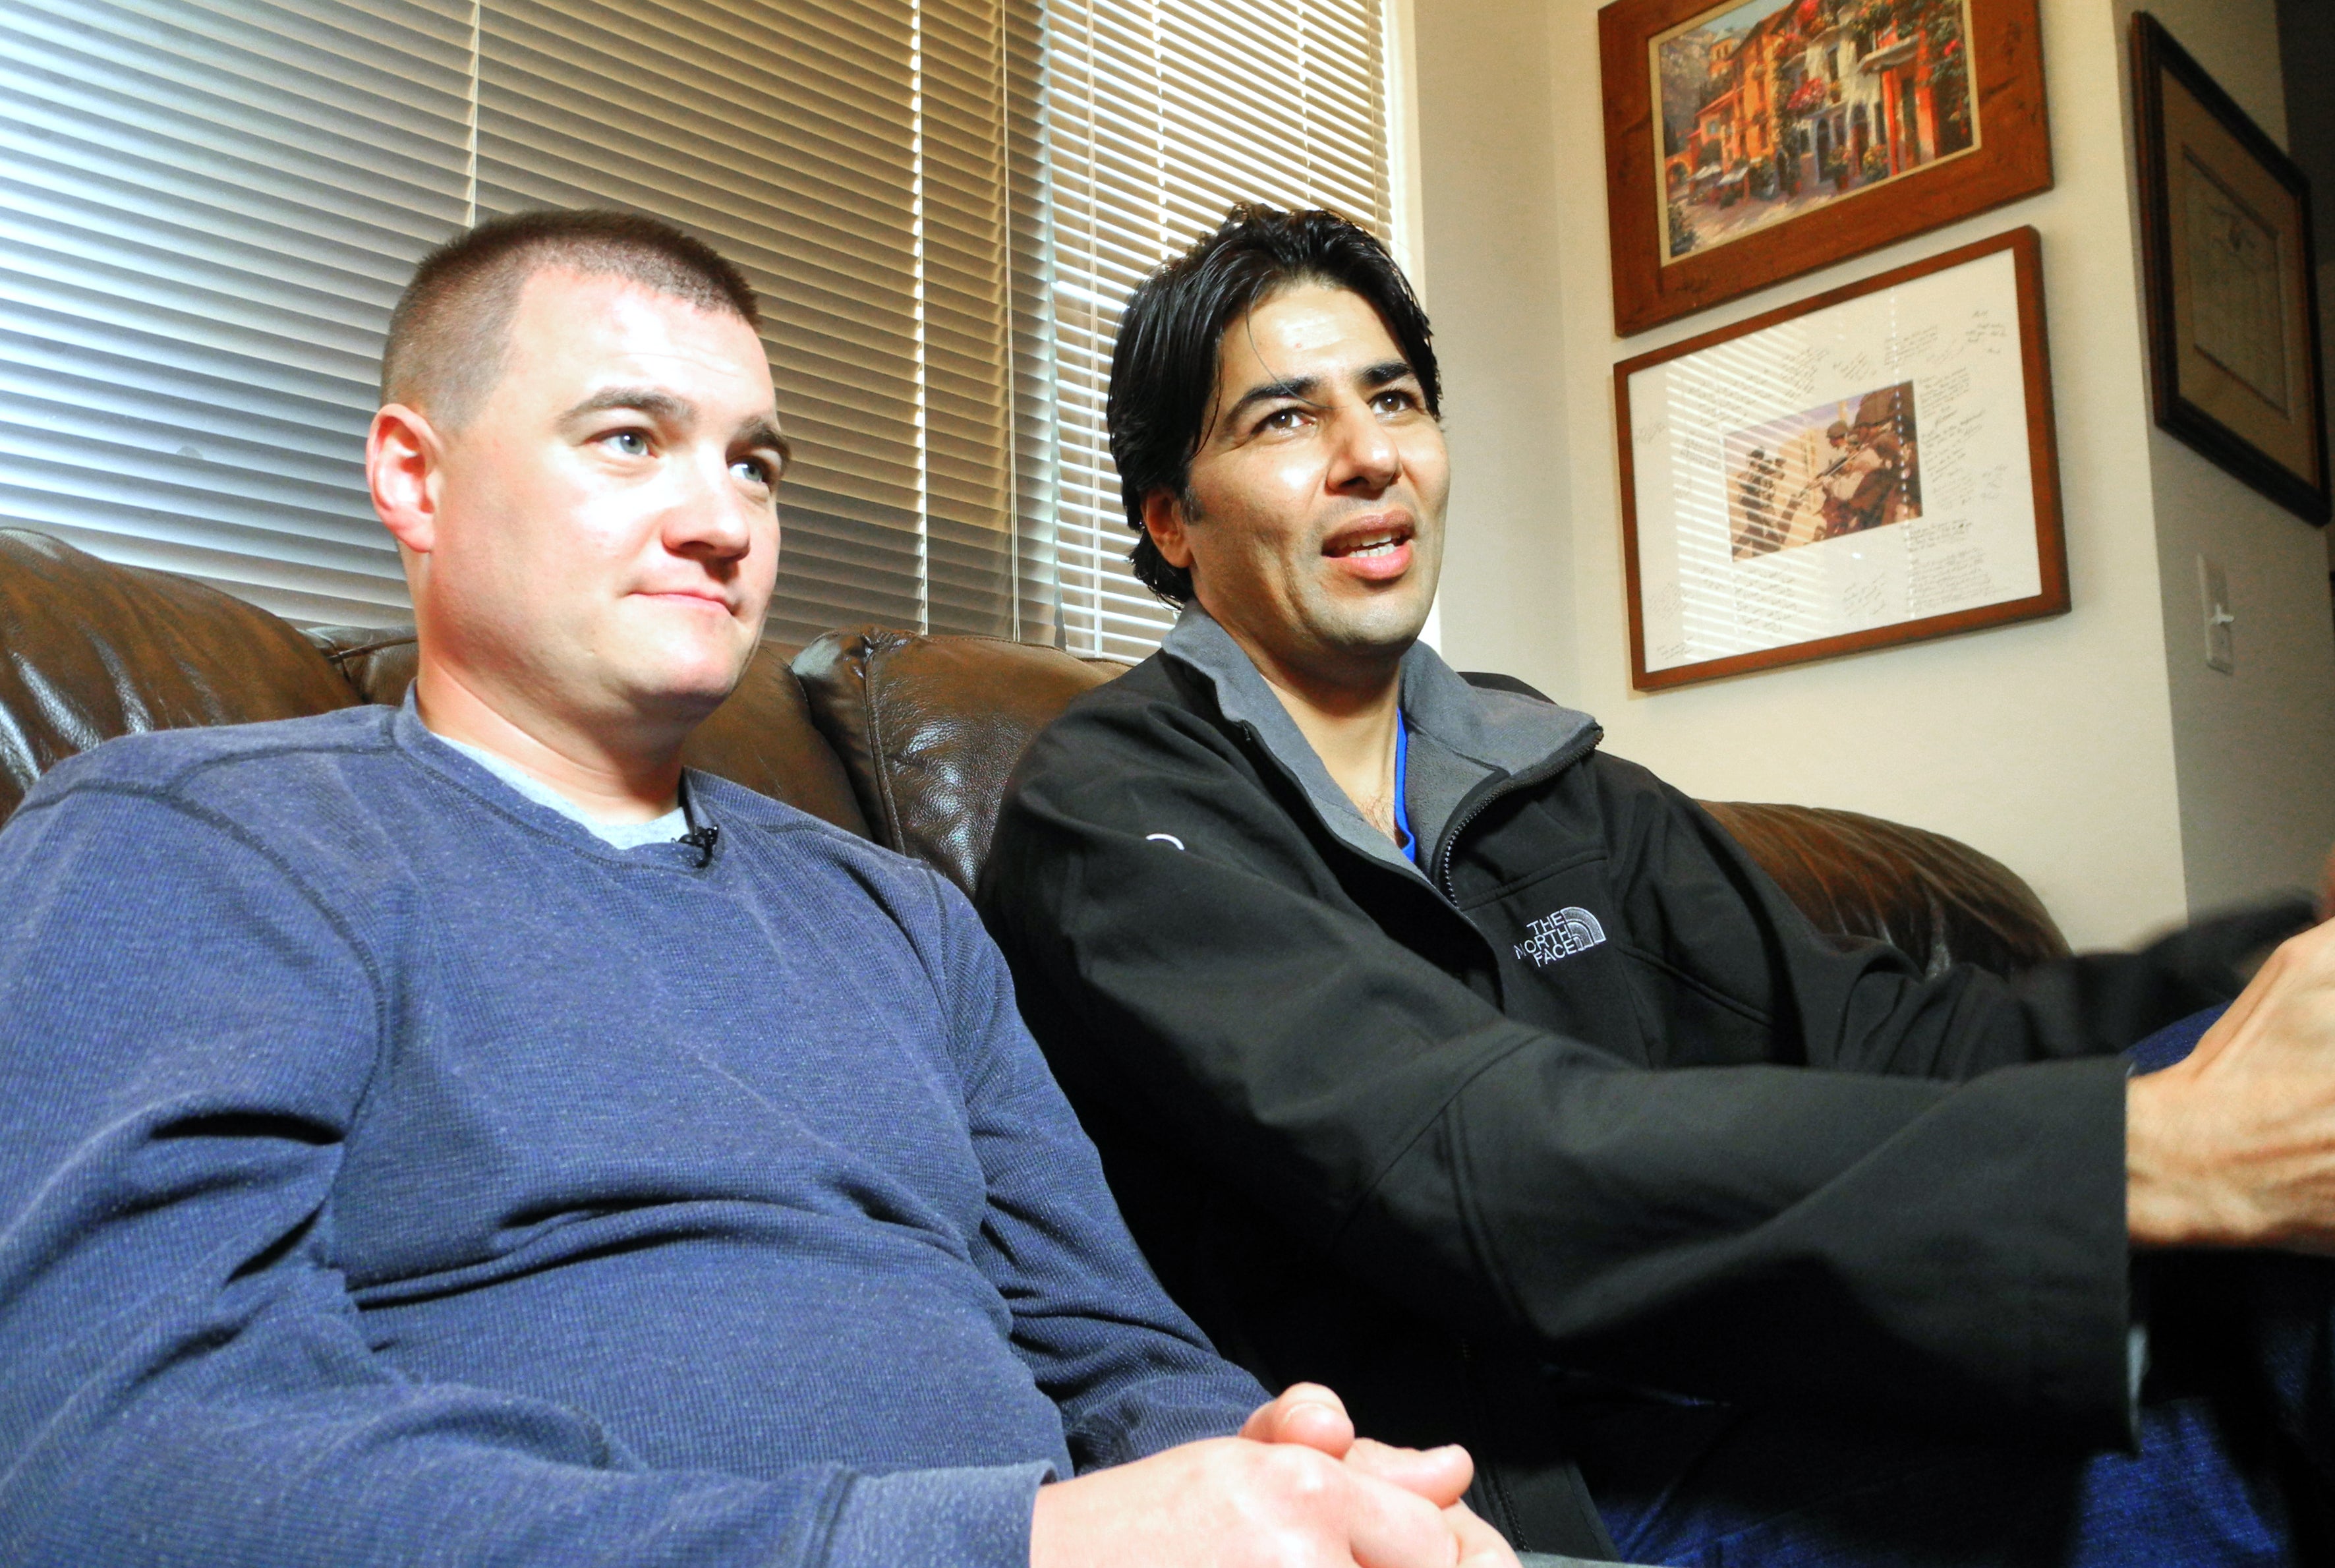 US Army Captain Matt Zeller (L) with translator Janis Shenwari, whom he credits for saving his life in a firefight in Afghanistan in November 2008, during an interview on November 21, 2013 in Arlington, Virginia.